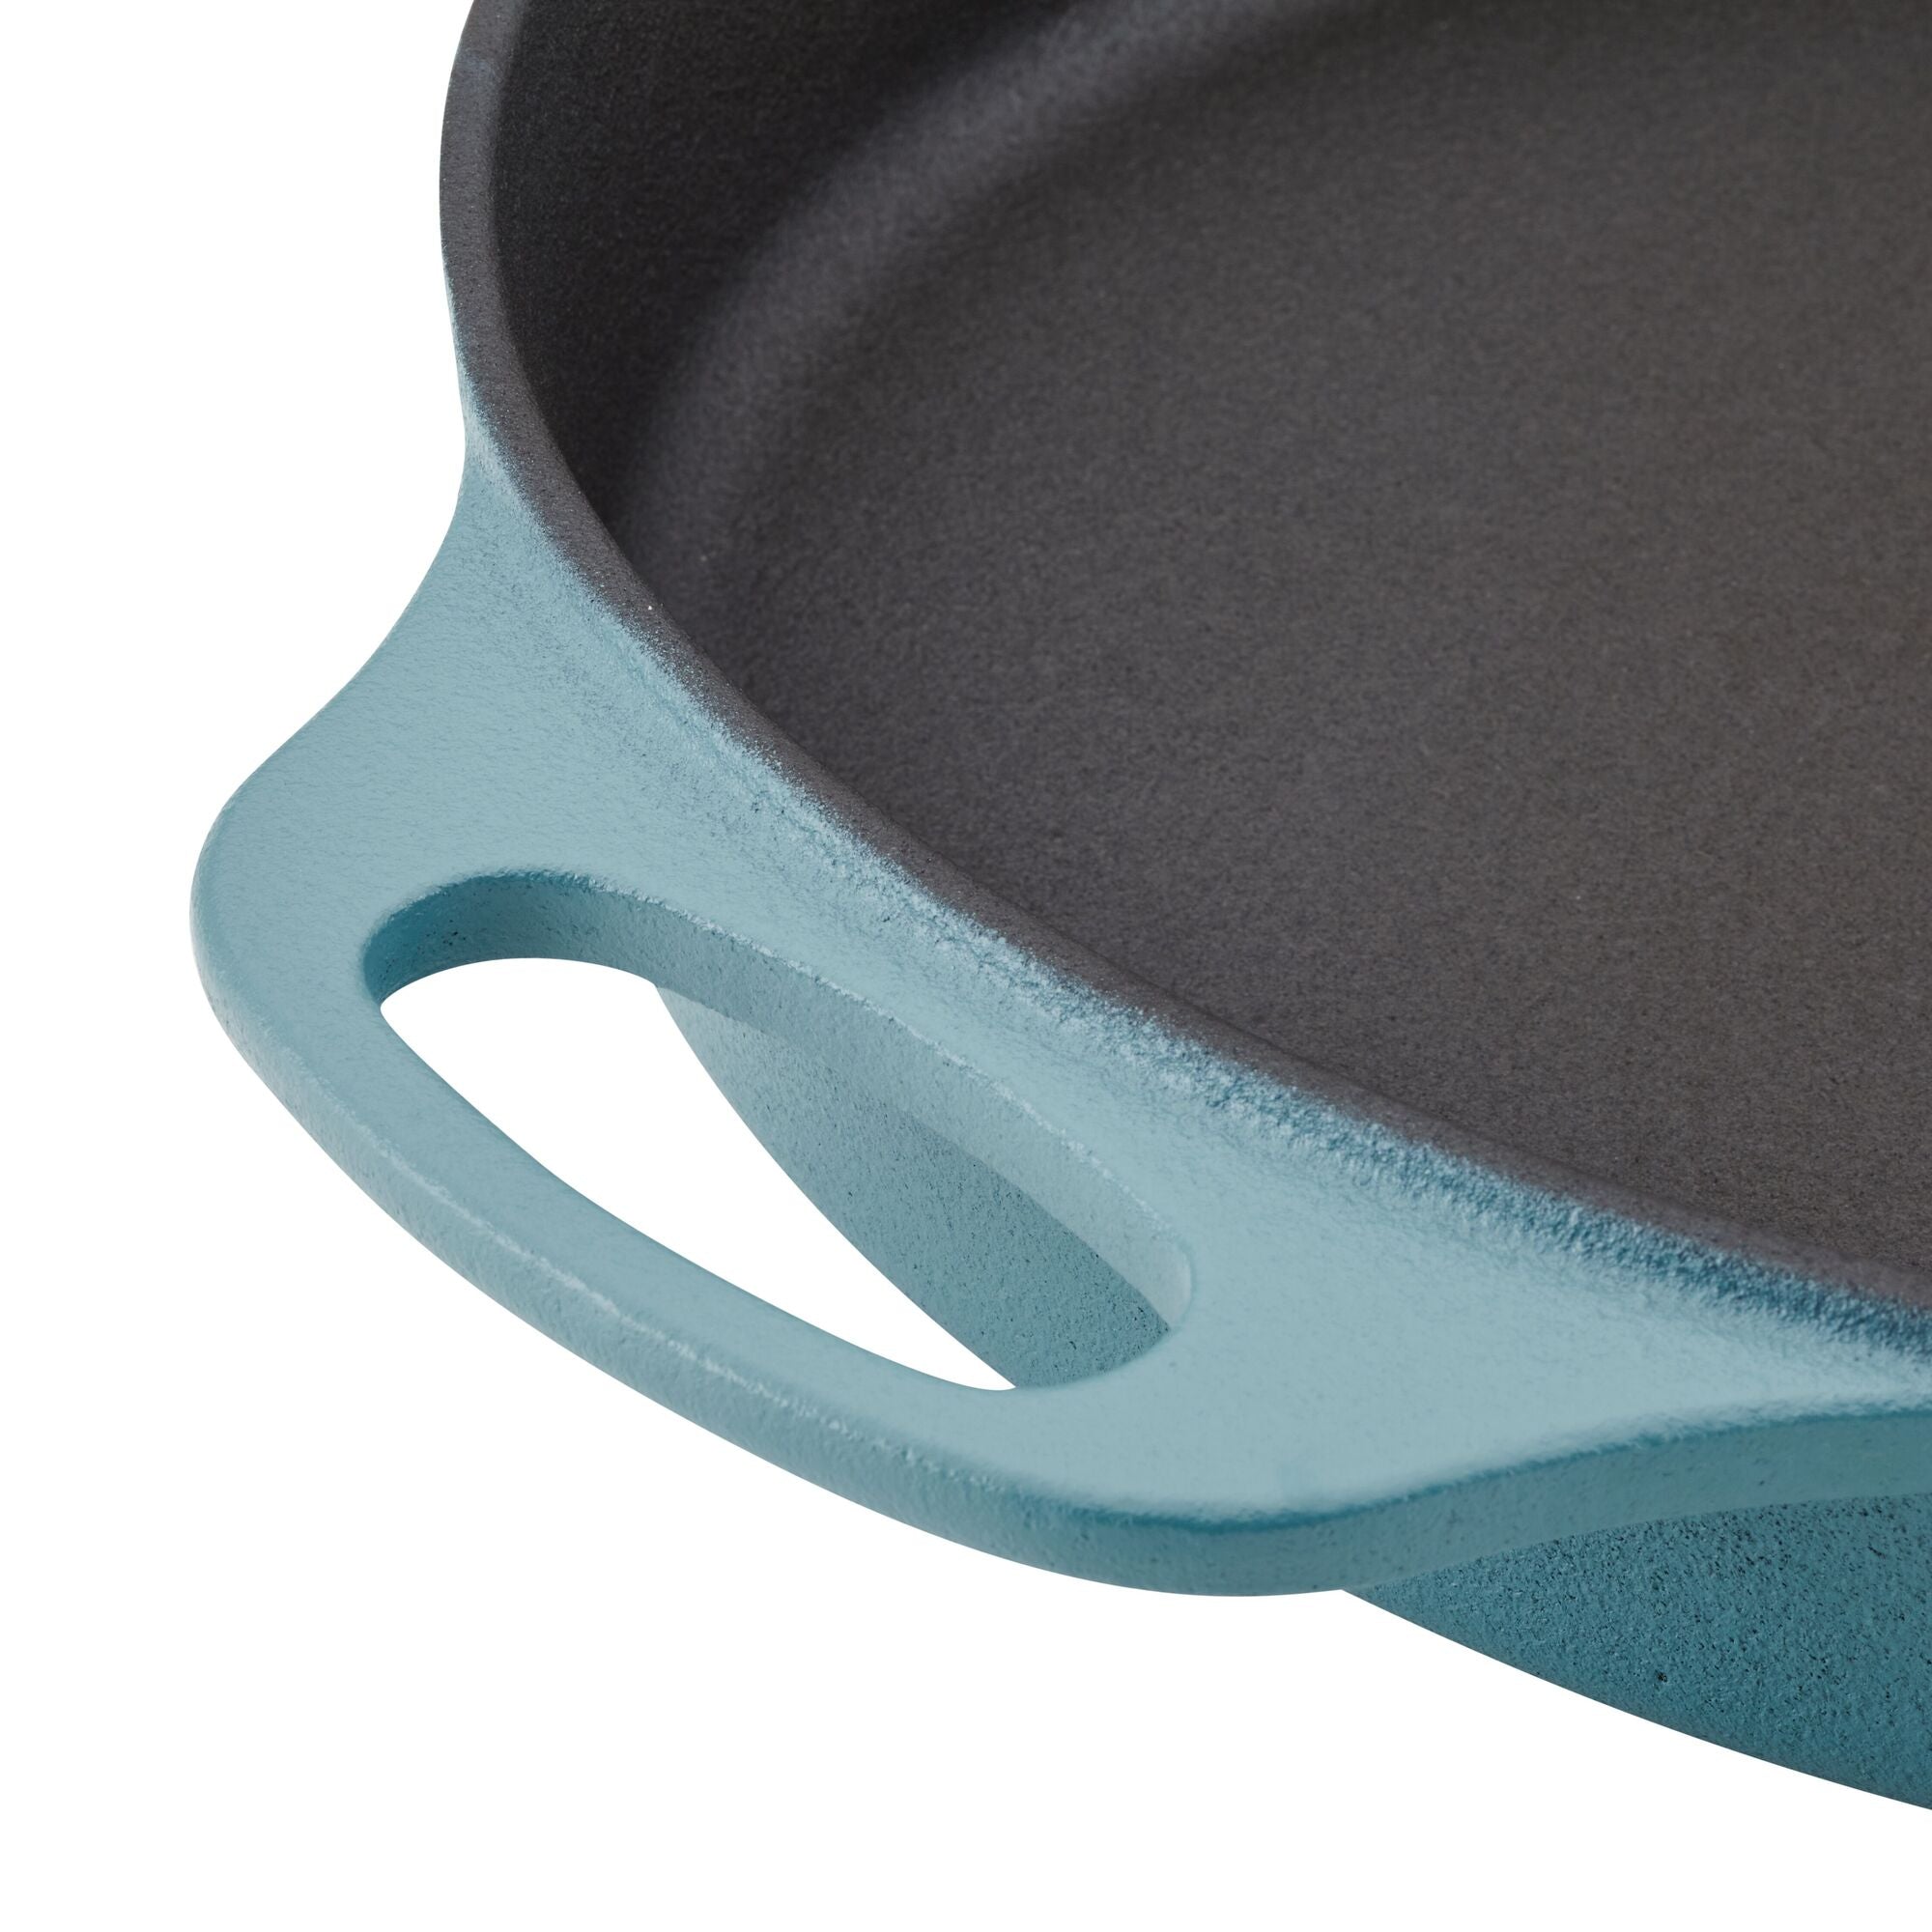 Rachael Ray NITRO Cast Iron Frying Pan / Skillet, Induction-suitable &  Reviews